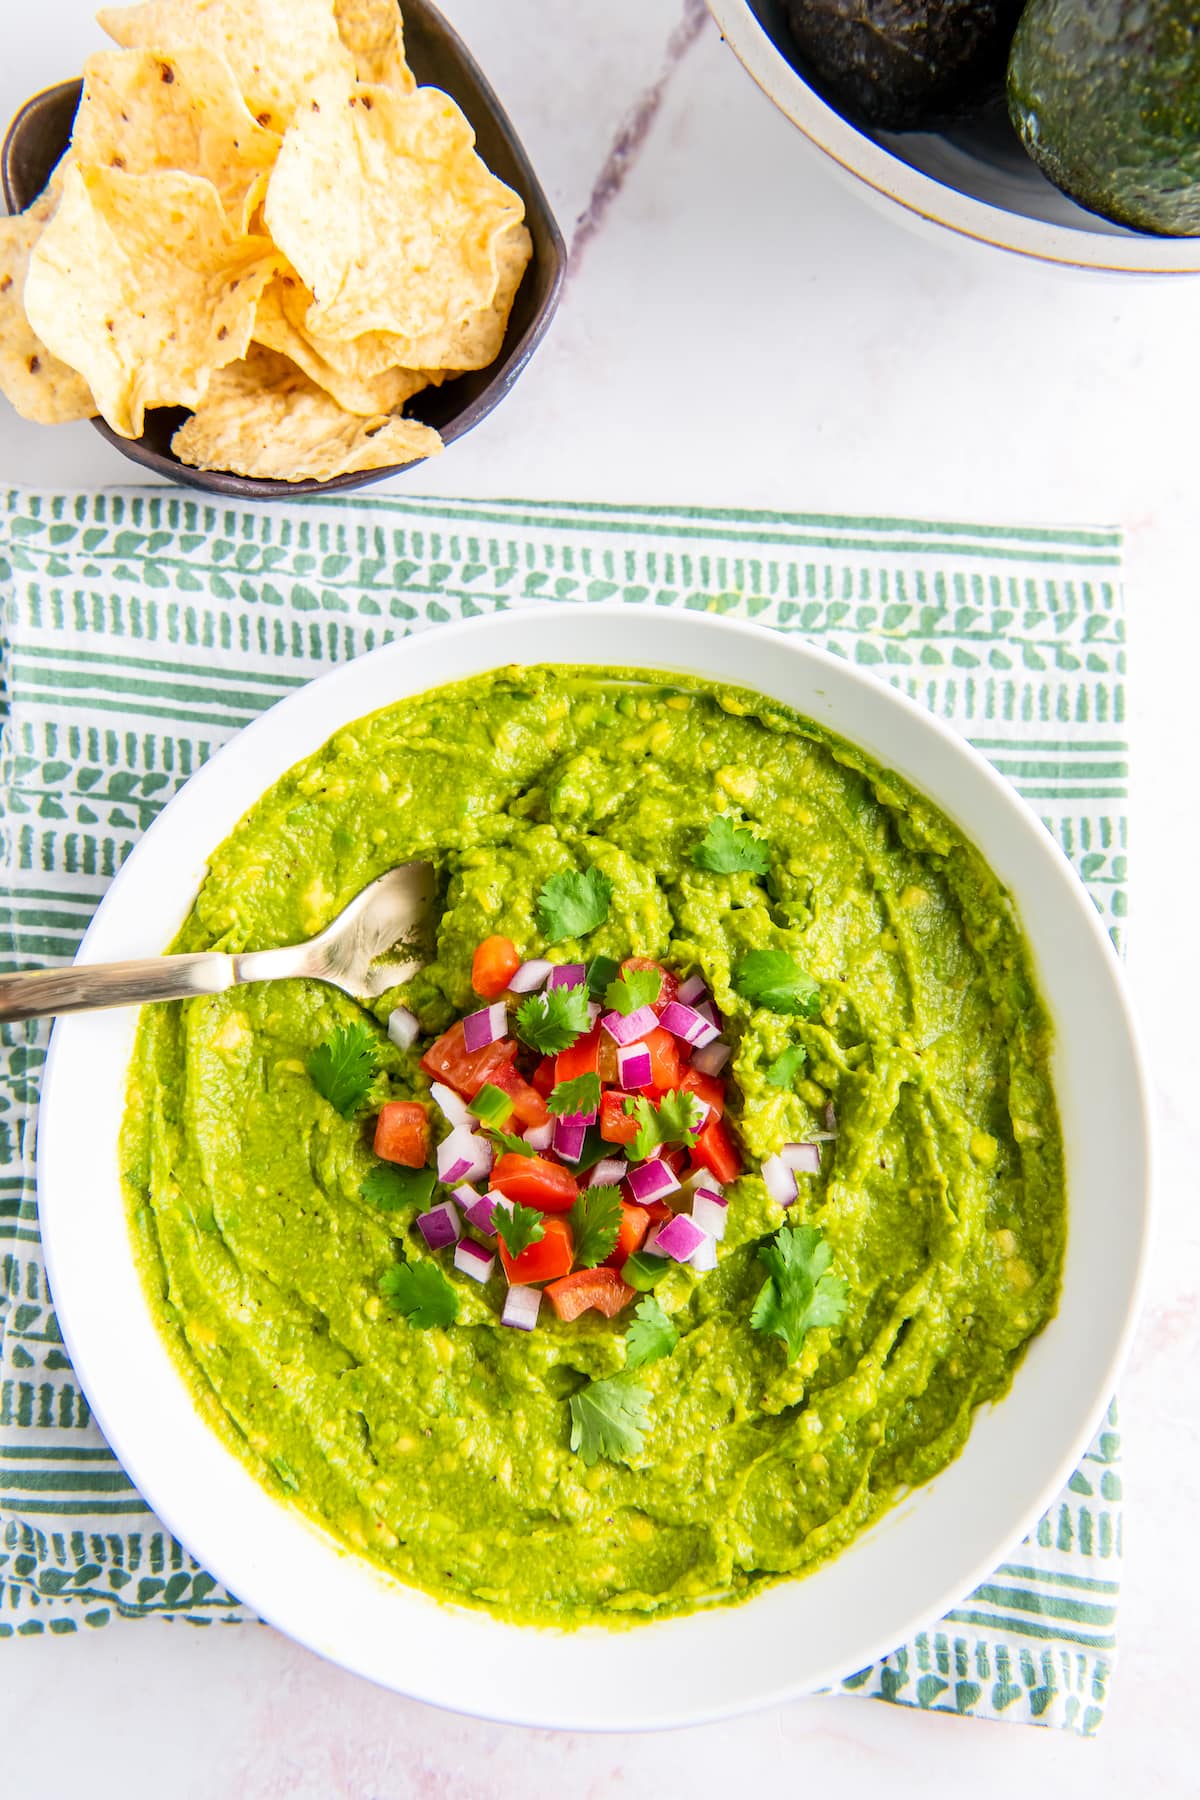 a bowl of guacamole with tomato, red onion, and jalapeno garnish